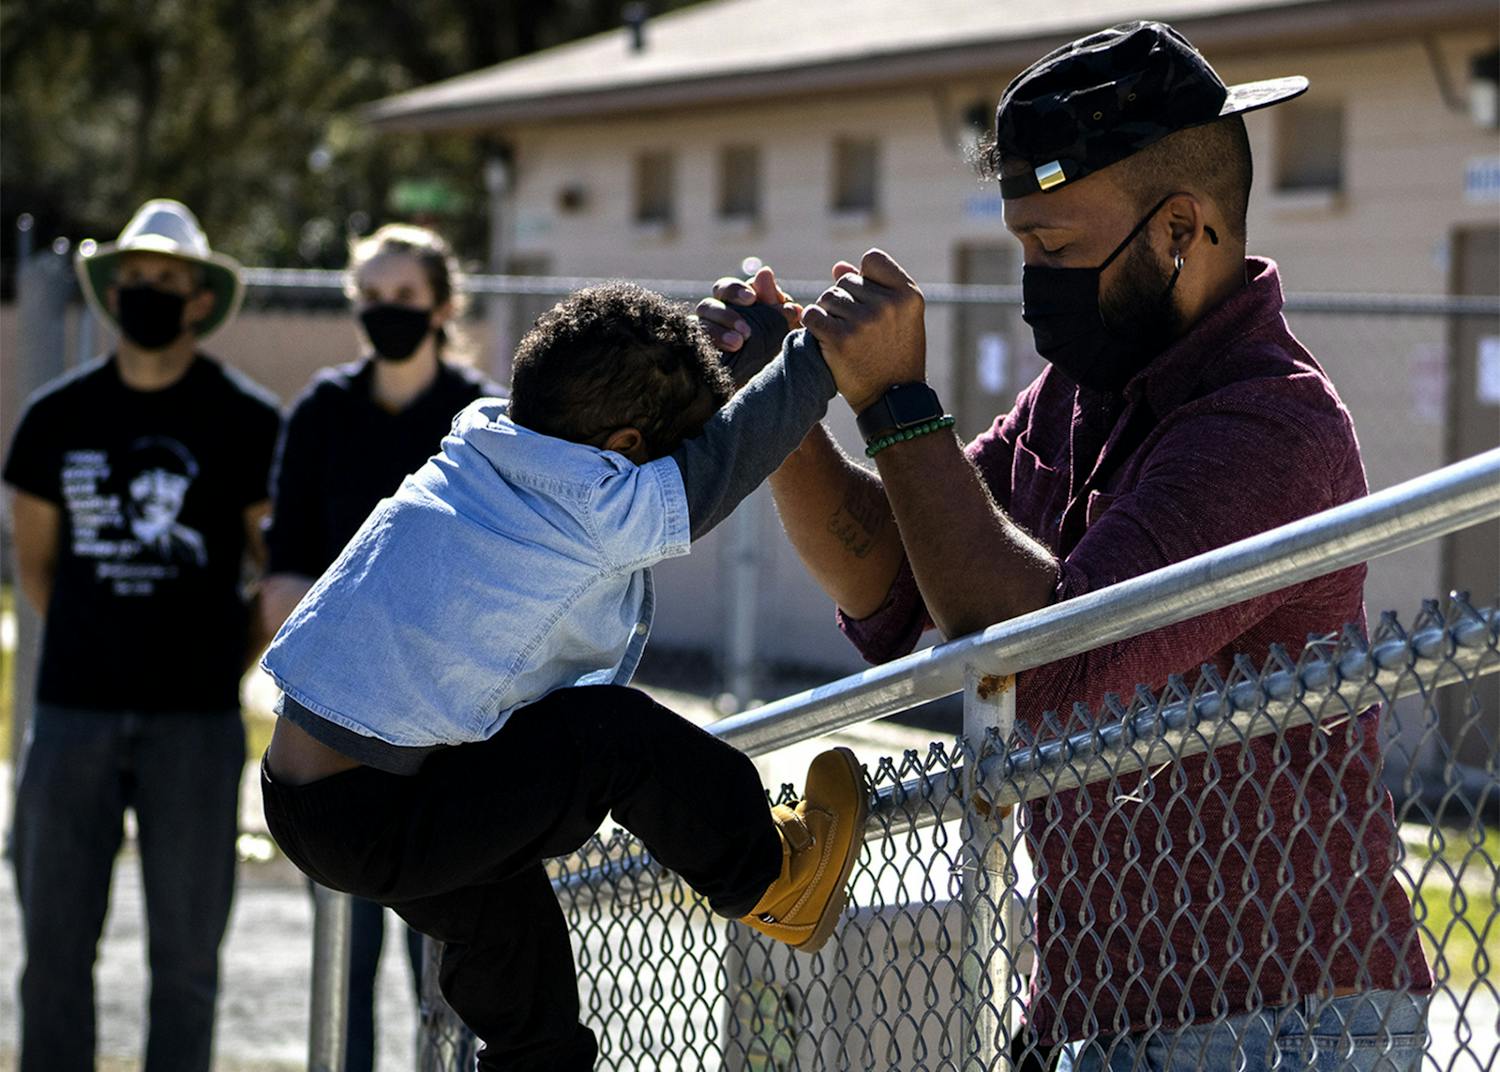 Ryan Hope Travis helps his 2-year-old son, Rezen Hope Travis, climb a fence at the King Celebration at Citizens Field on Monday, Jan. 18, 2021. Ryan Hope Travis said it was the first Martin Luther King Jr. Day celebration Rezen was old enough to understand. “Him knowing his history is the foundation of him being able to grow,” he said. 